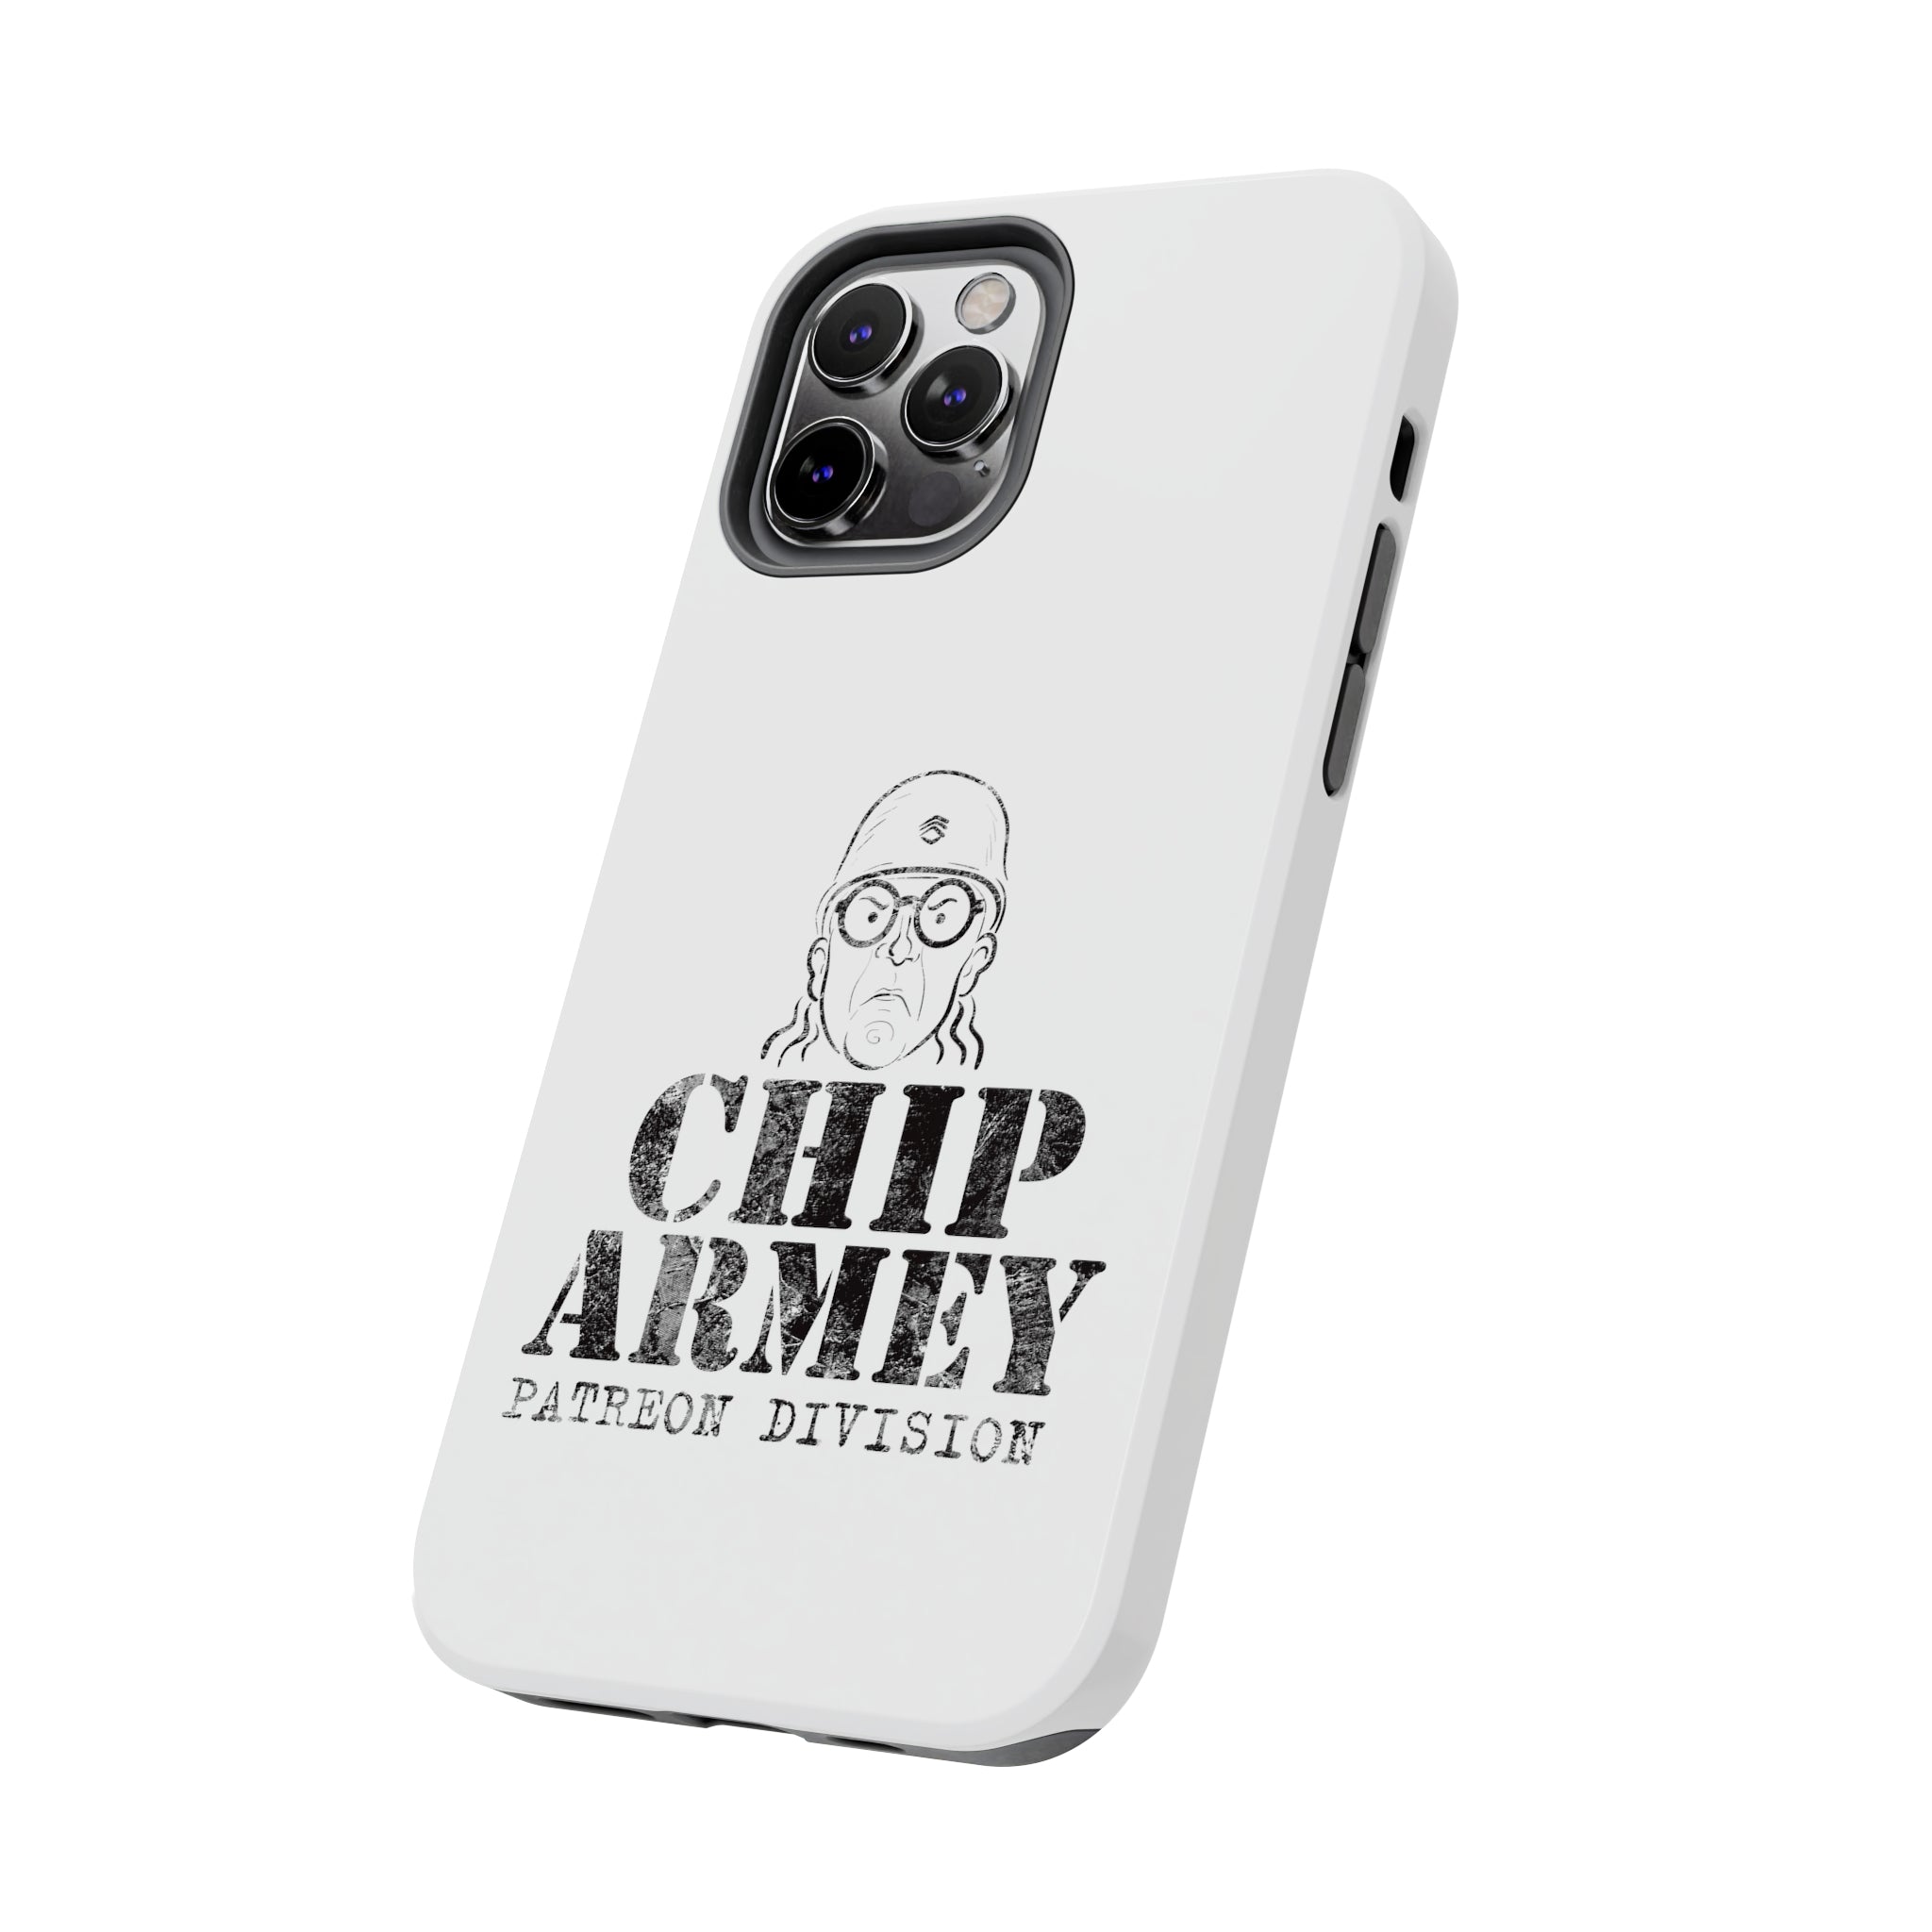 CHIP ARMEY PATREON DIVISION HARD PHONE COVER